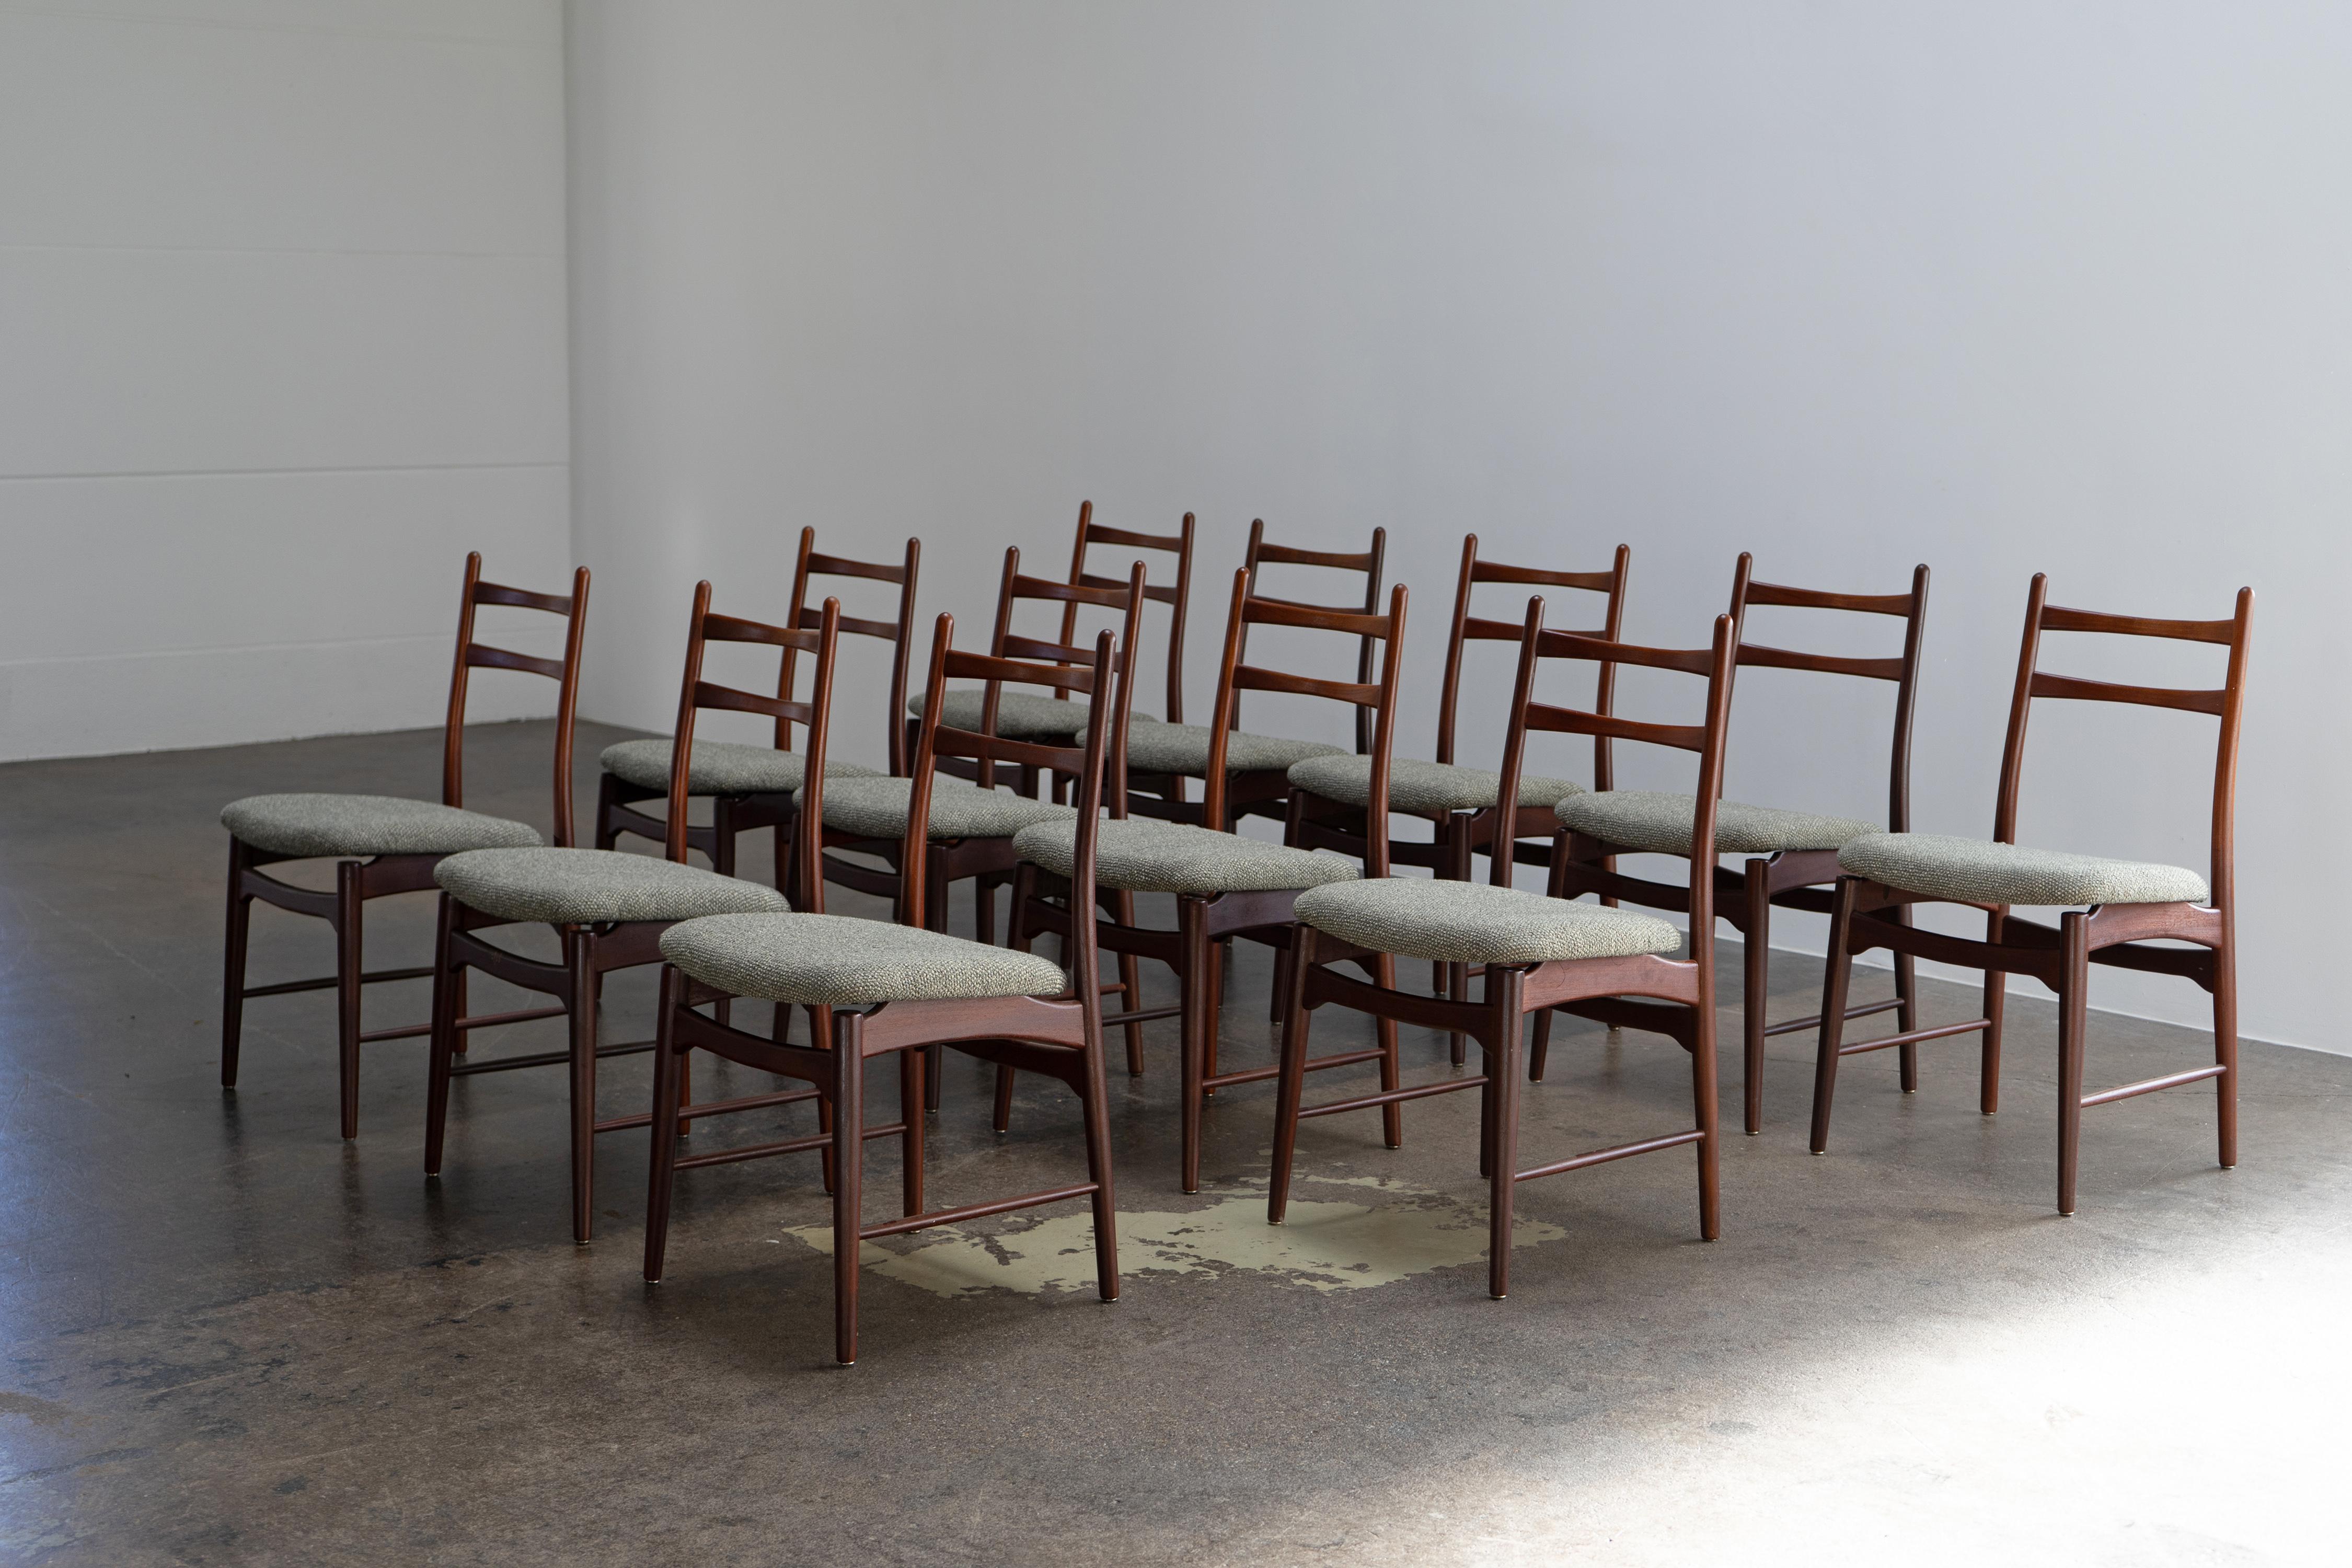 Set of Twelve Mid-Century Teak Dining Chairs by Wilkhahn Germany, 1958 In Good Condition For Sale In Rosendahl, DE